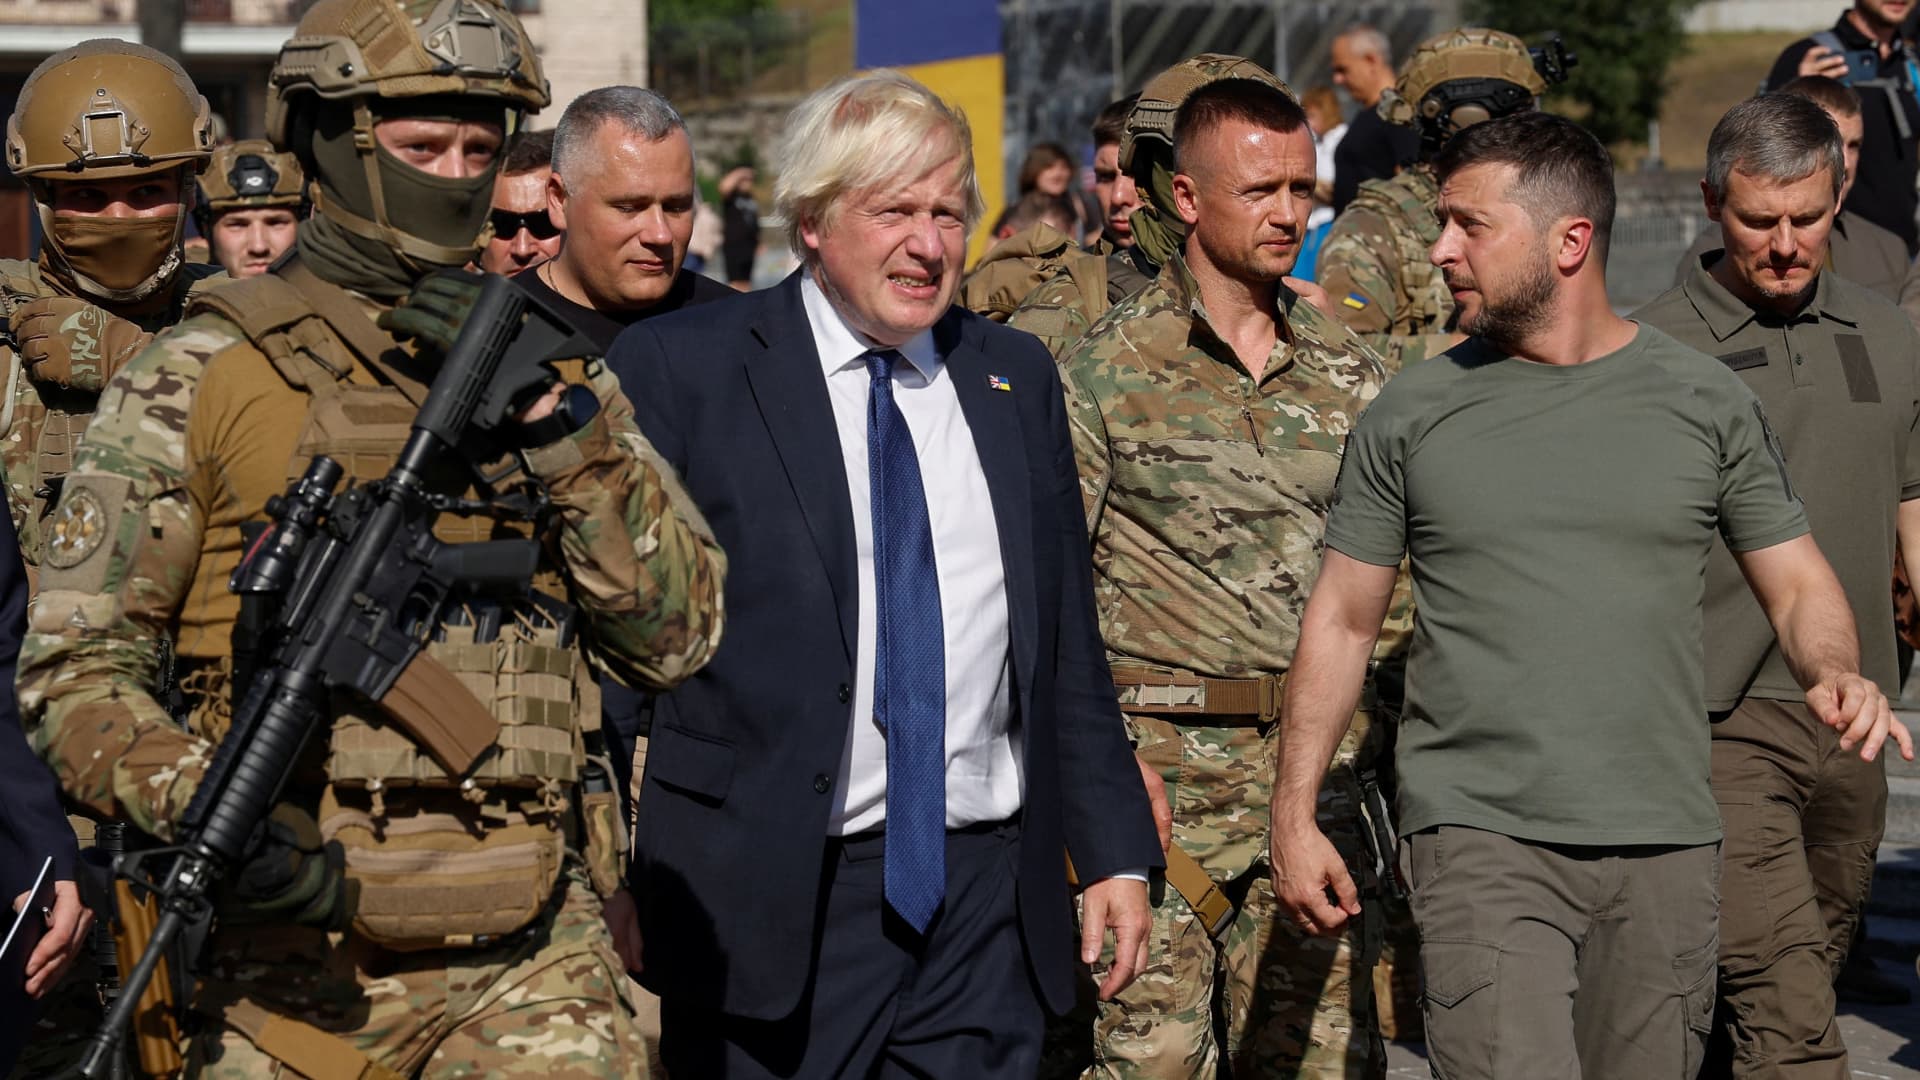 British Prime Minister Boris Johnson and Ukrainian President Volodymyr Zelenskiy walk at the Independence Square during an airstrike alarm, amid Russia's attack on Ukraine, in Kyiv, Ukraine August 24, 2022.